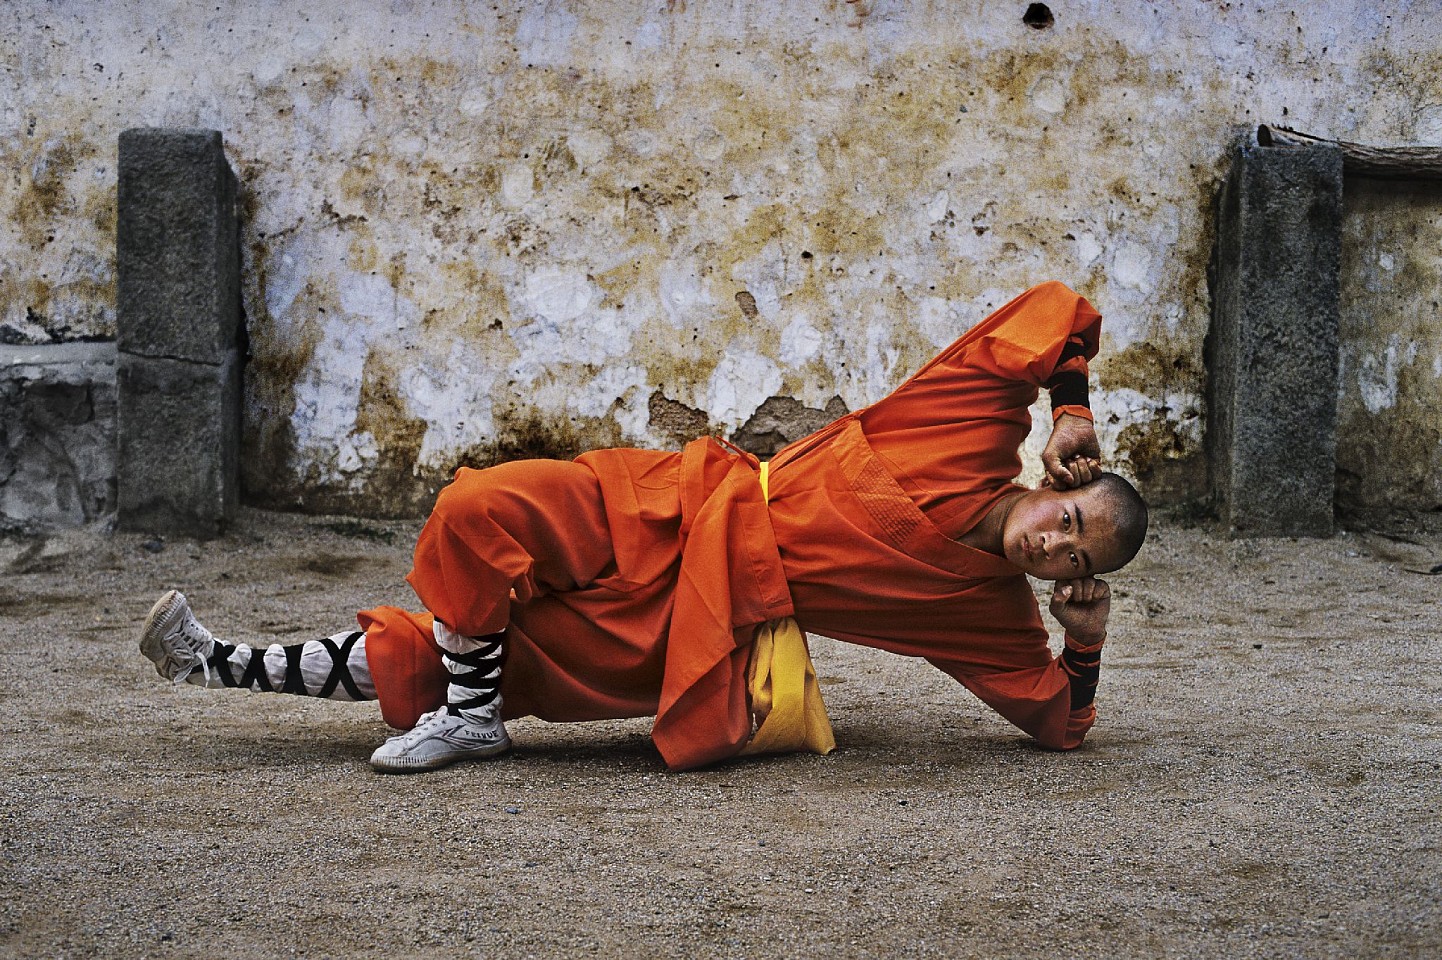 Steve McCurry, Shaolin Monastery, 1989
FujiFlex Crystal Archive Print
Price/Size on request